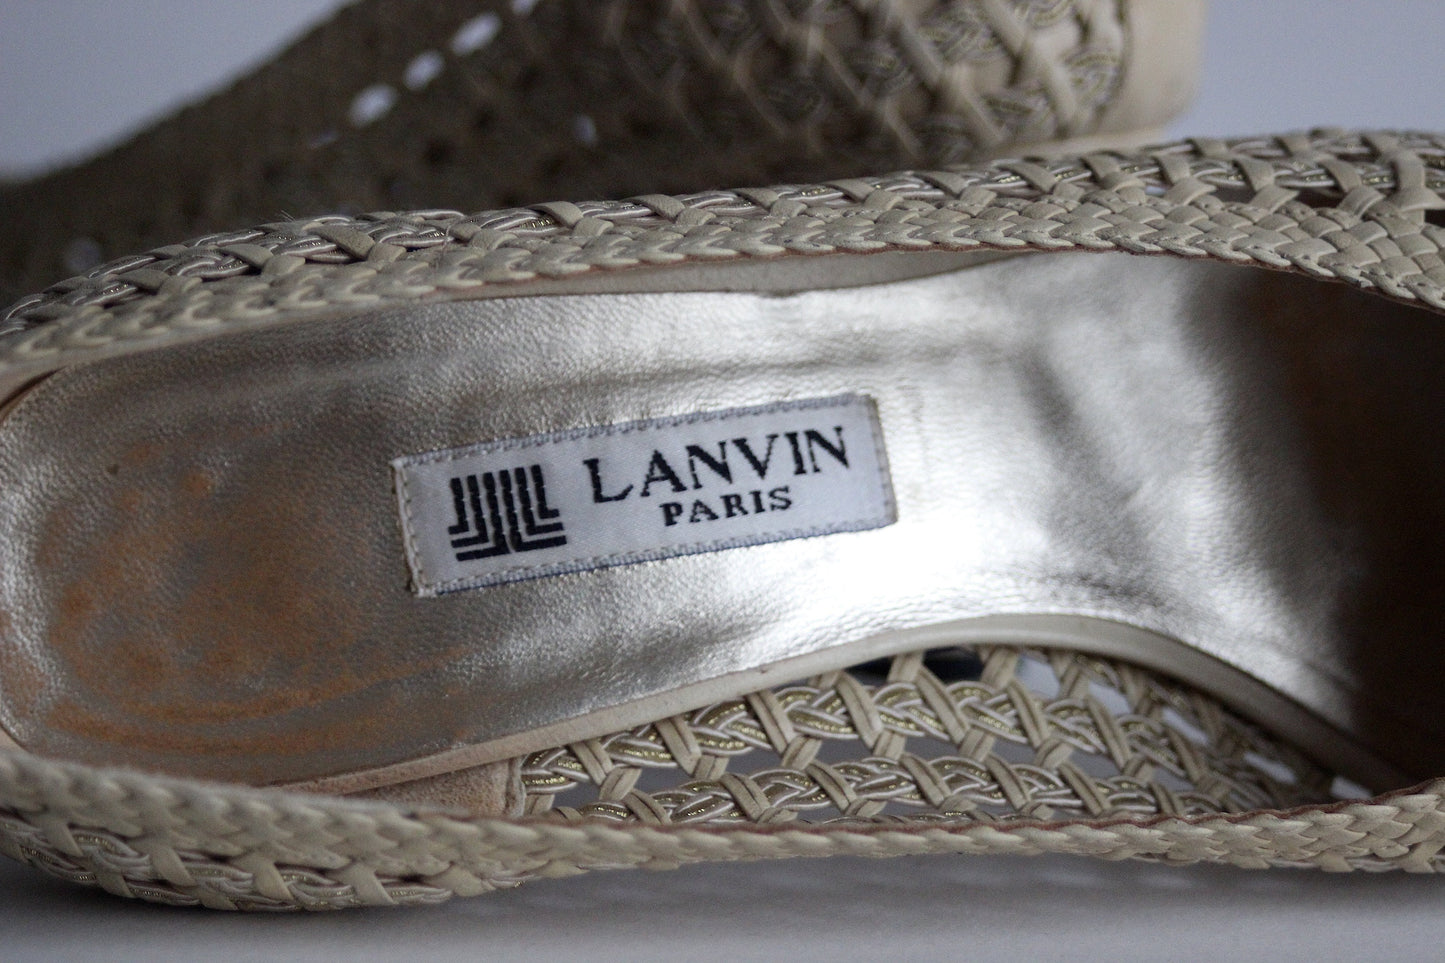 LANVIN braided leather pumps and gold trimmings. 90s